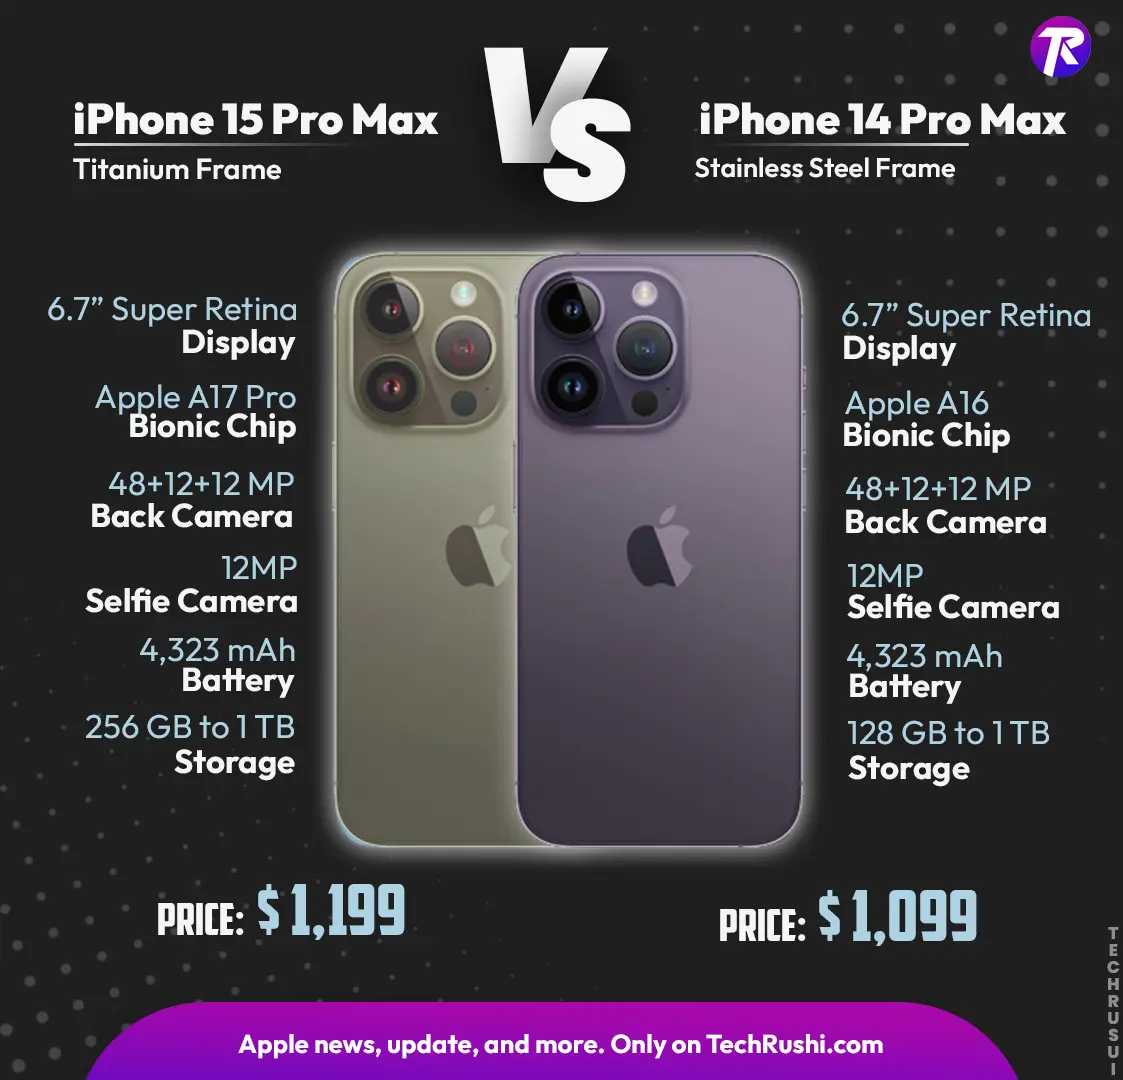 iPhone 15 Pro Max vs iPhone 14 Pro Max Specifications